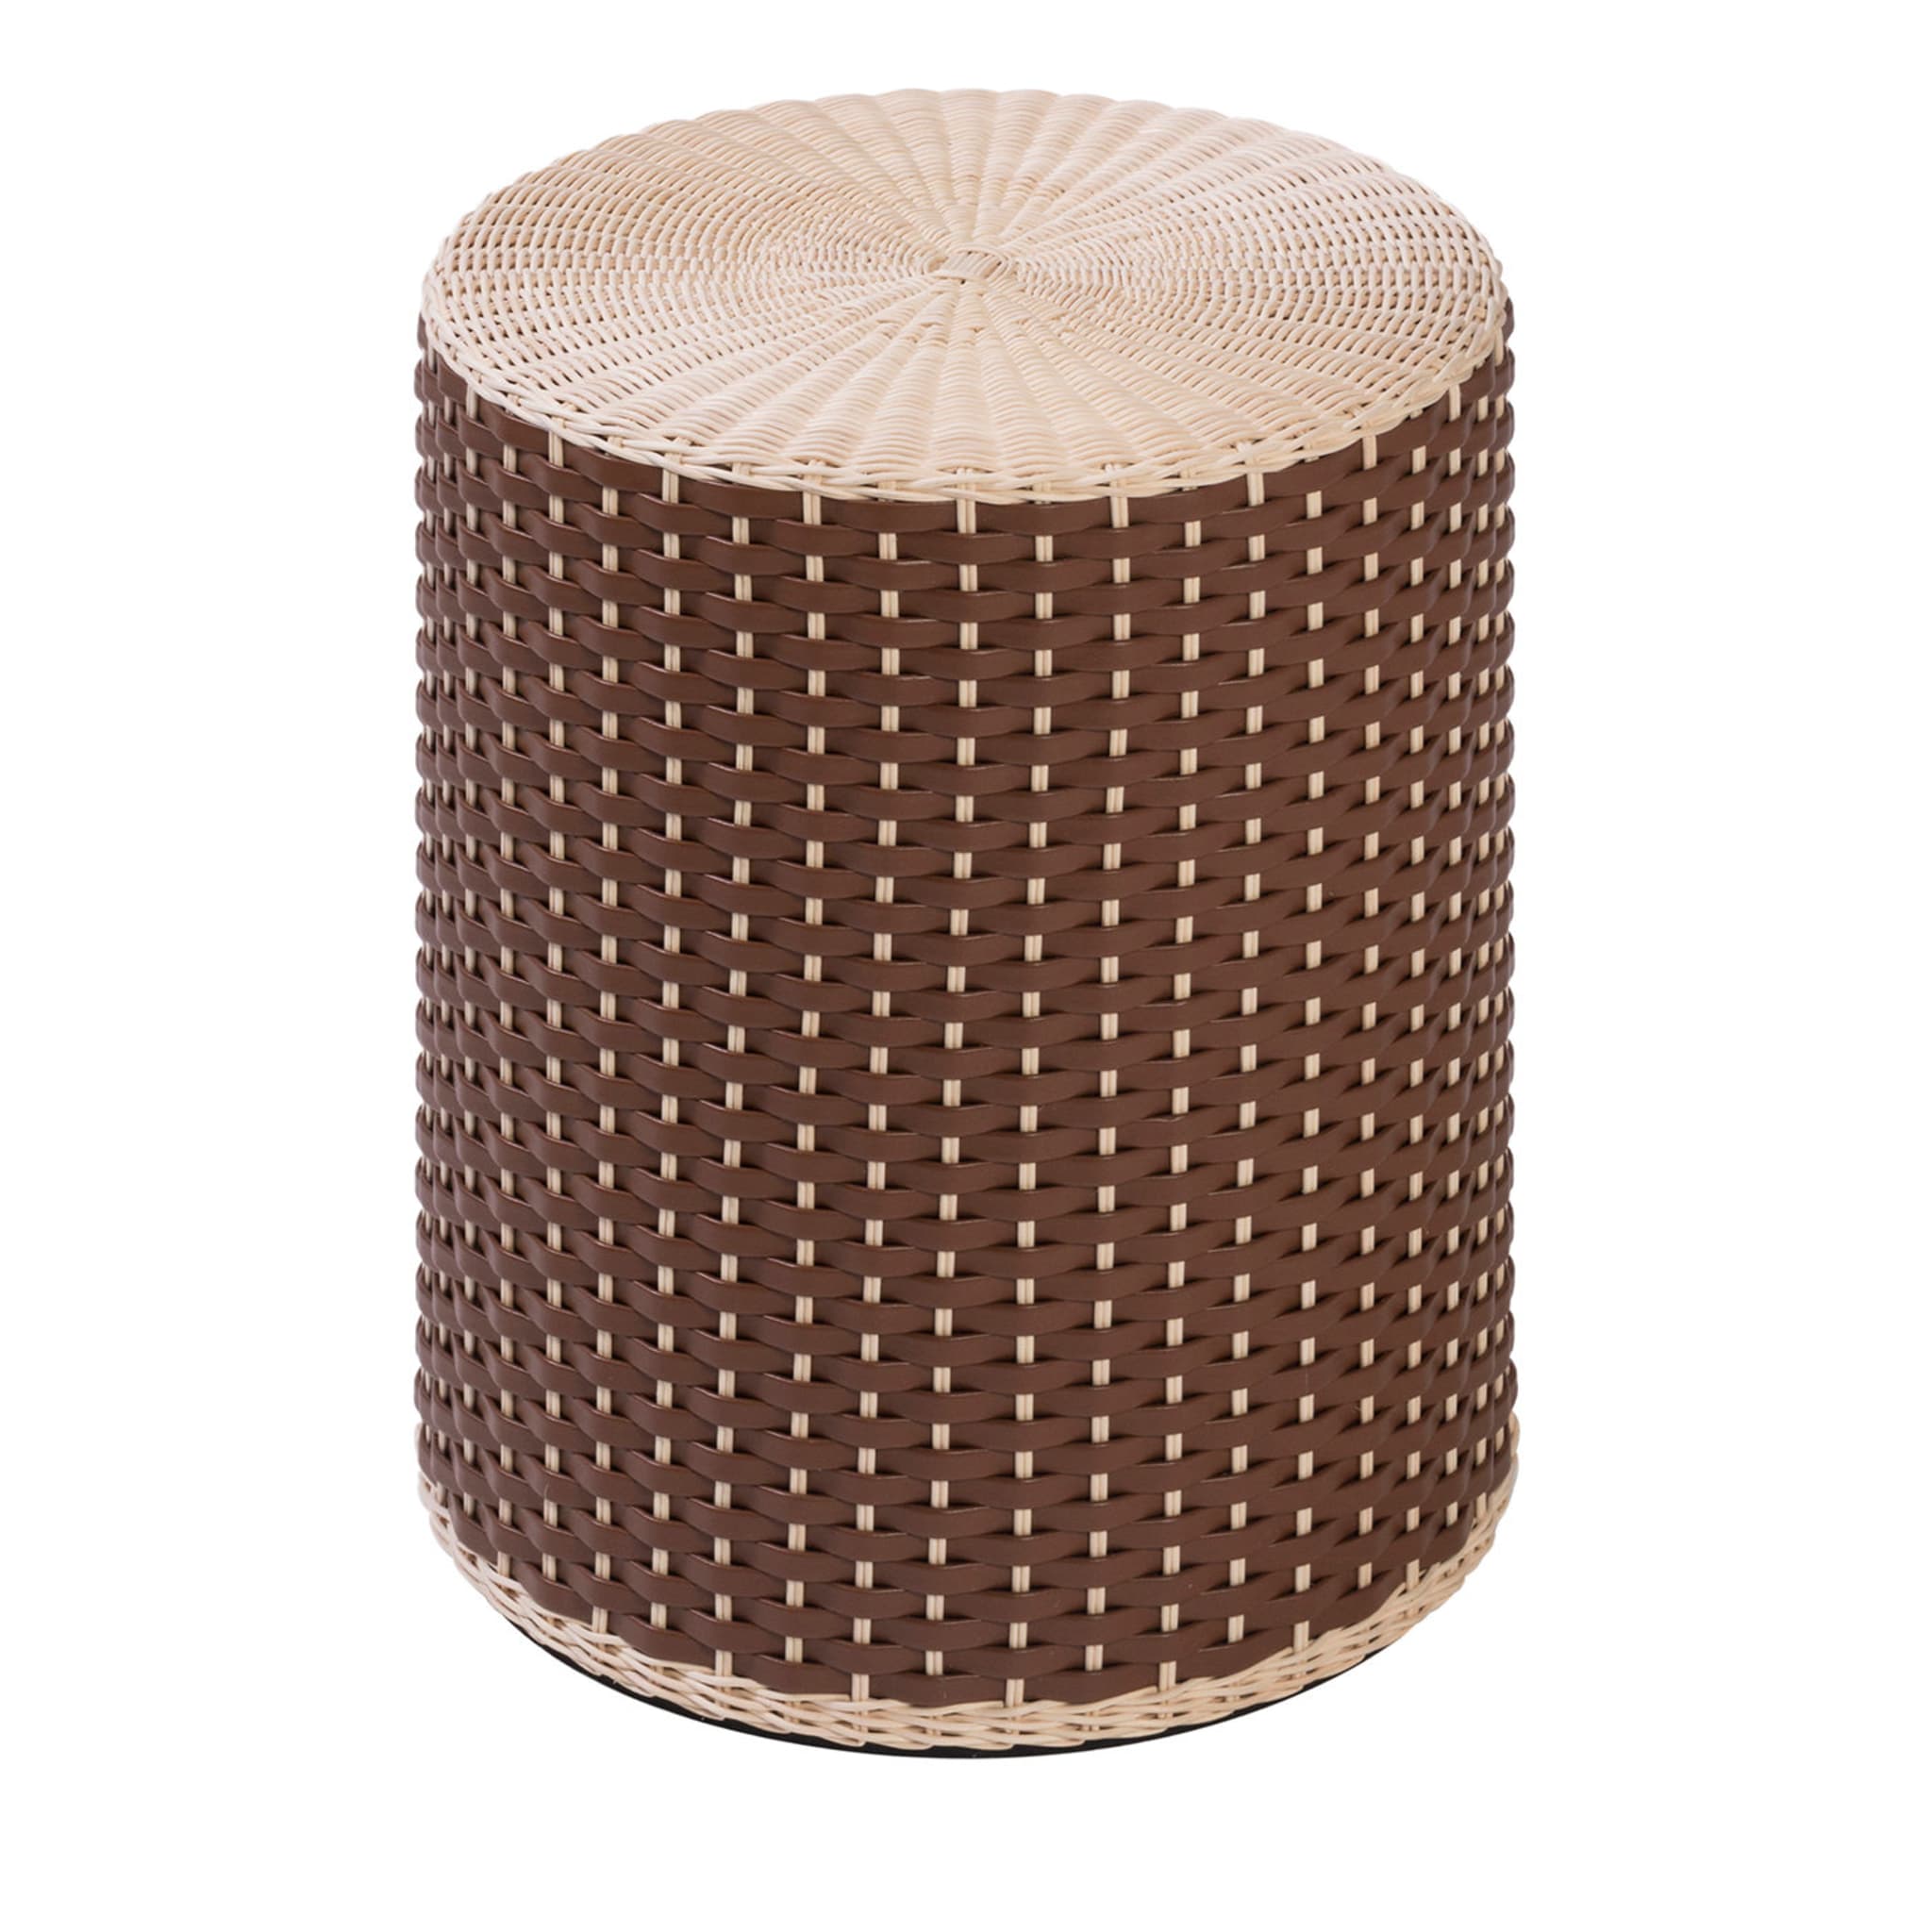 Renoir Leather & Rattan Stool/Side Table  - Main view